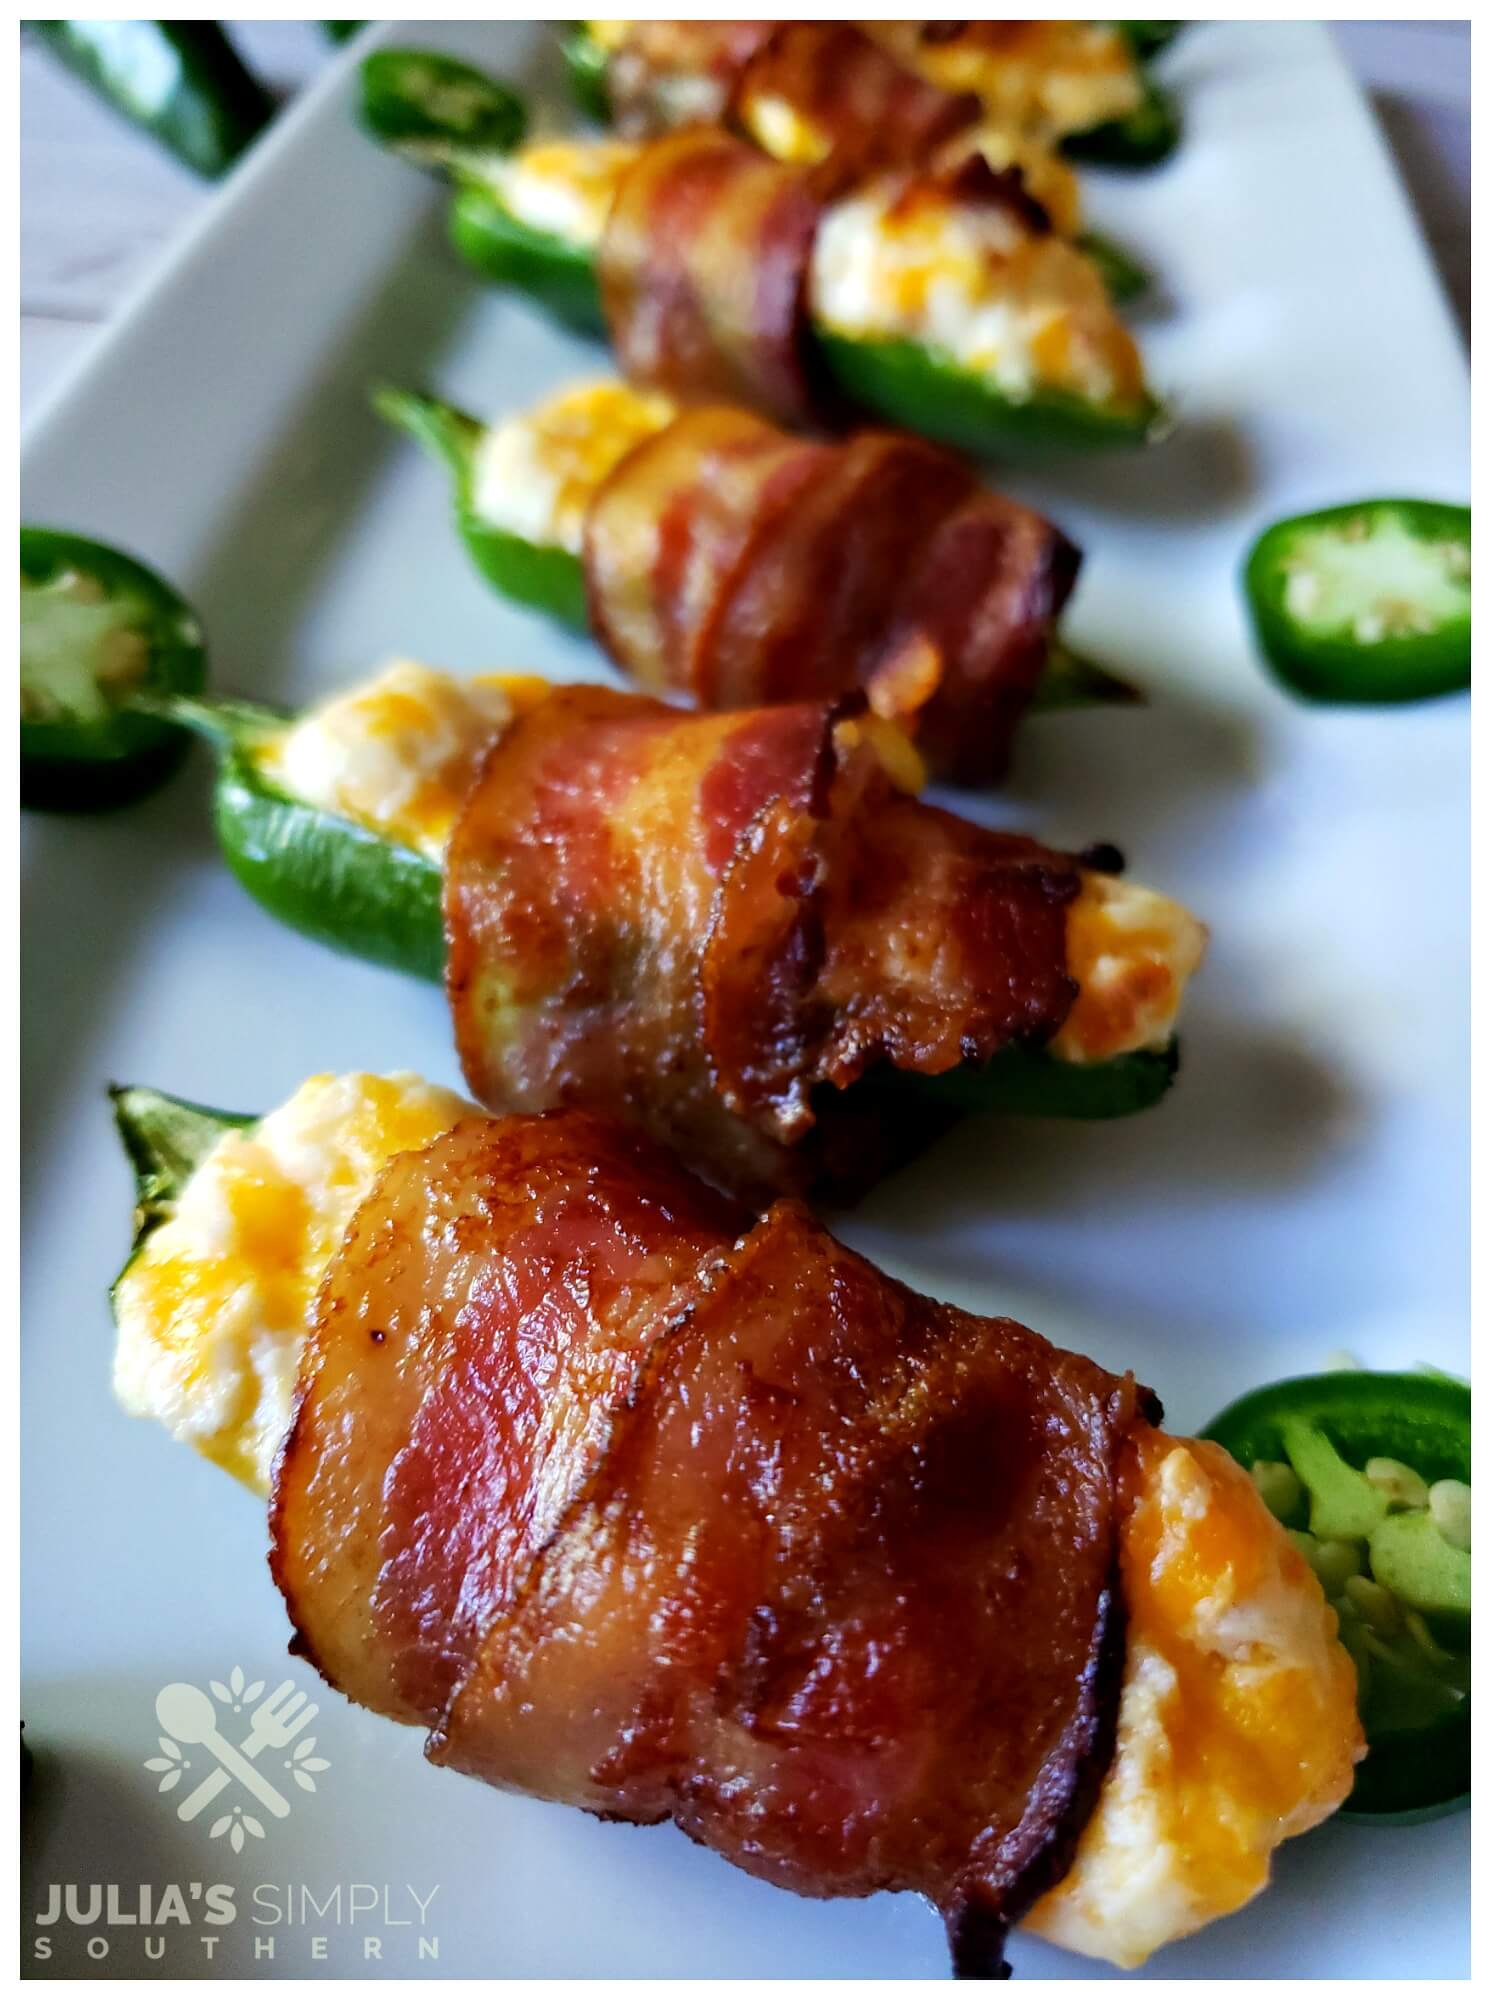 Easy Bacon Wrapped Jalapeno Poppers Julias Simply Southern,What Is Triple Sec Syrup